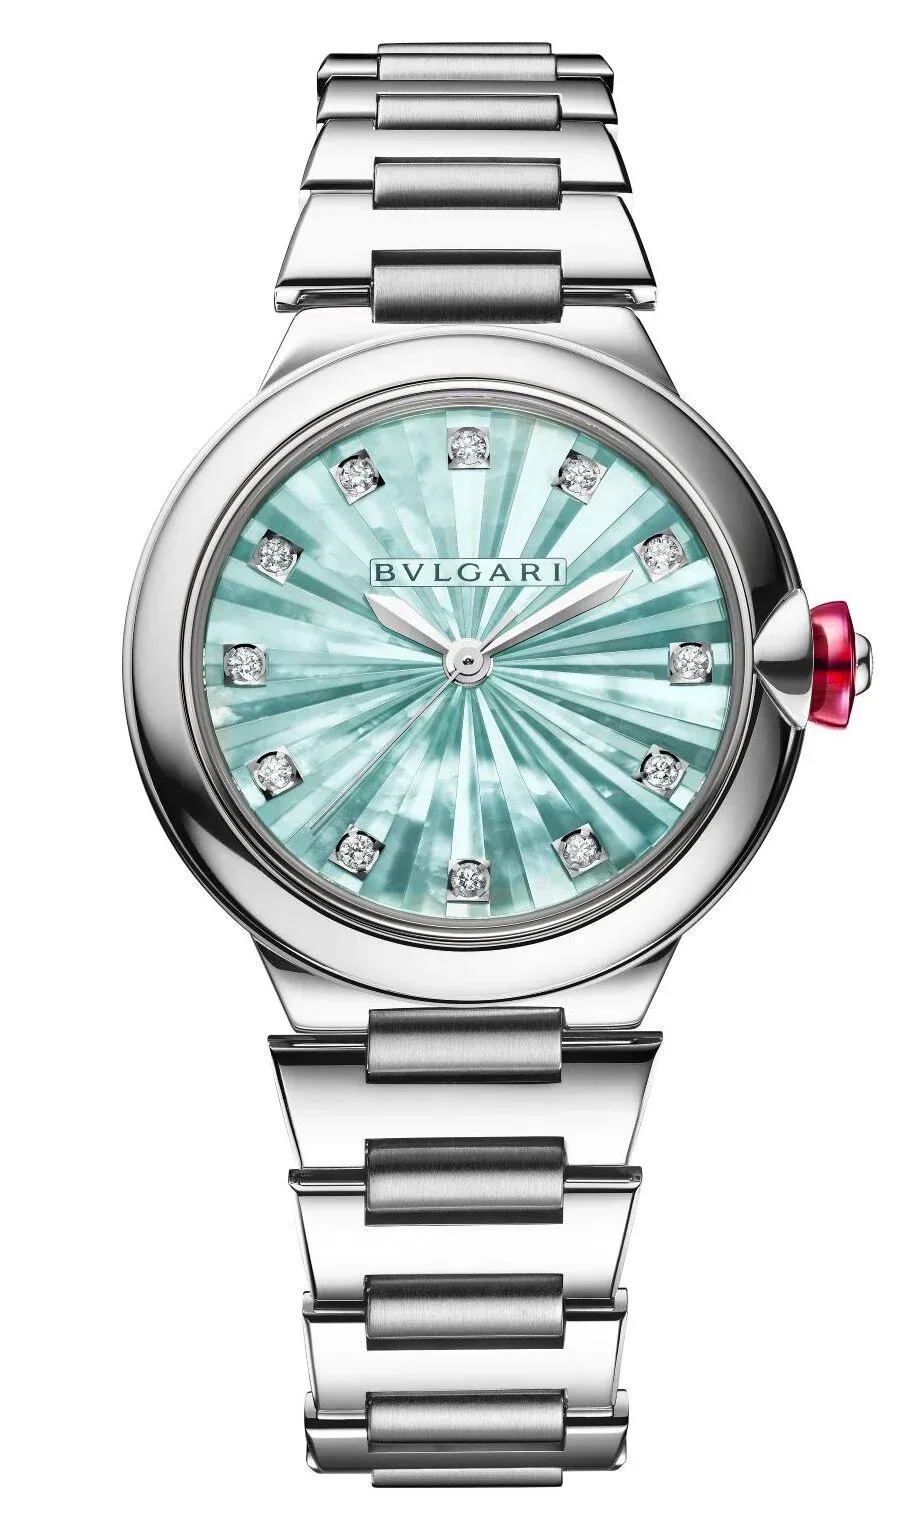 The dial features an assembly of ‘rays’ of finely cut mother-of-pearl